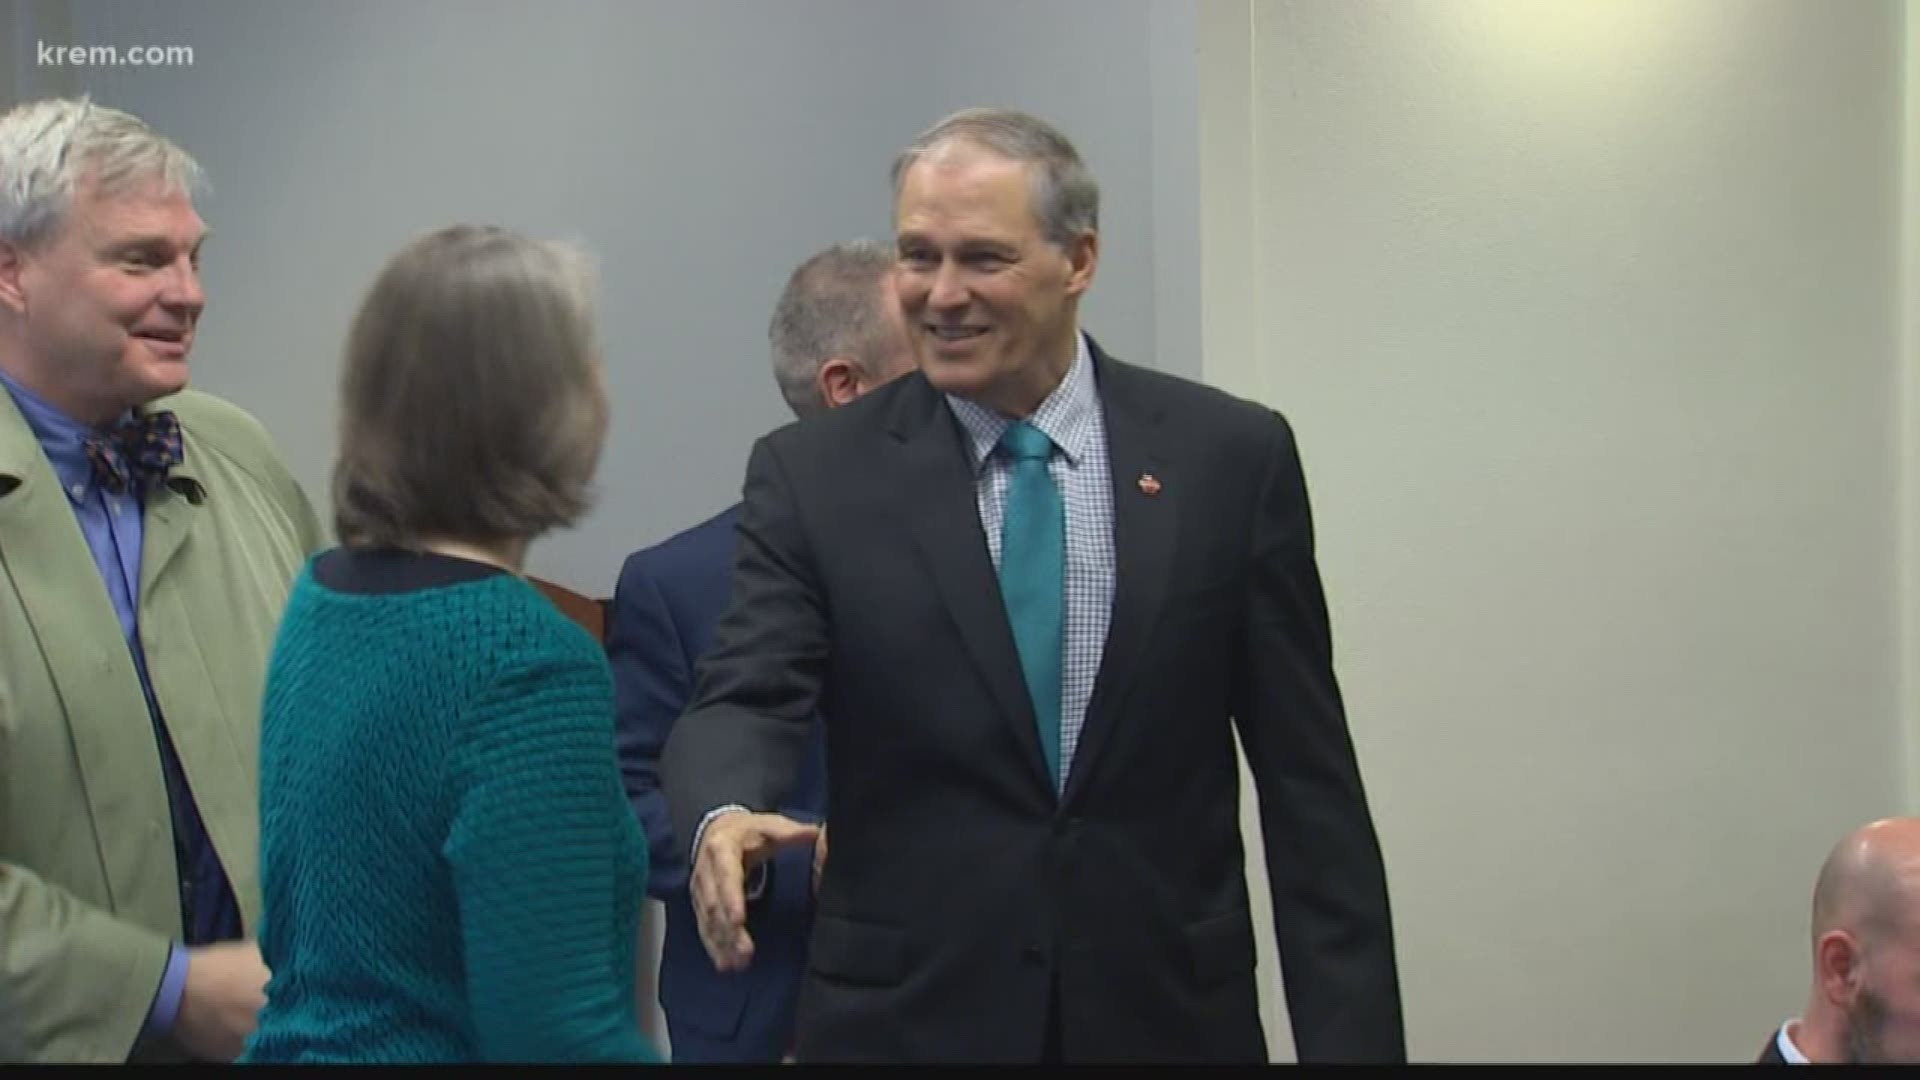 Inslee 20-20? Washington's Governor is widely expected to explore a Presidential run. At a state event today Republicans dropped hints that Governor Jay Inslee's aspirations may impact this legislative session.